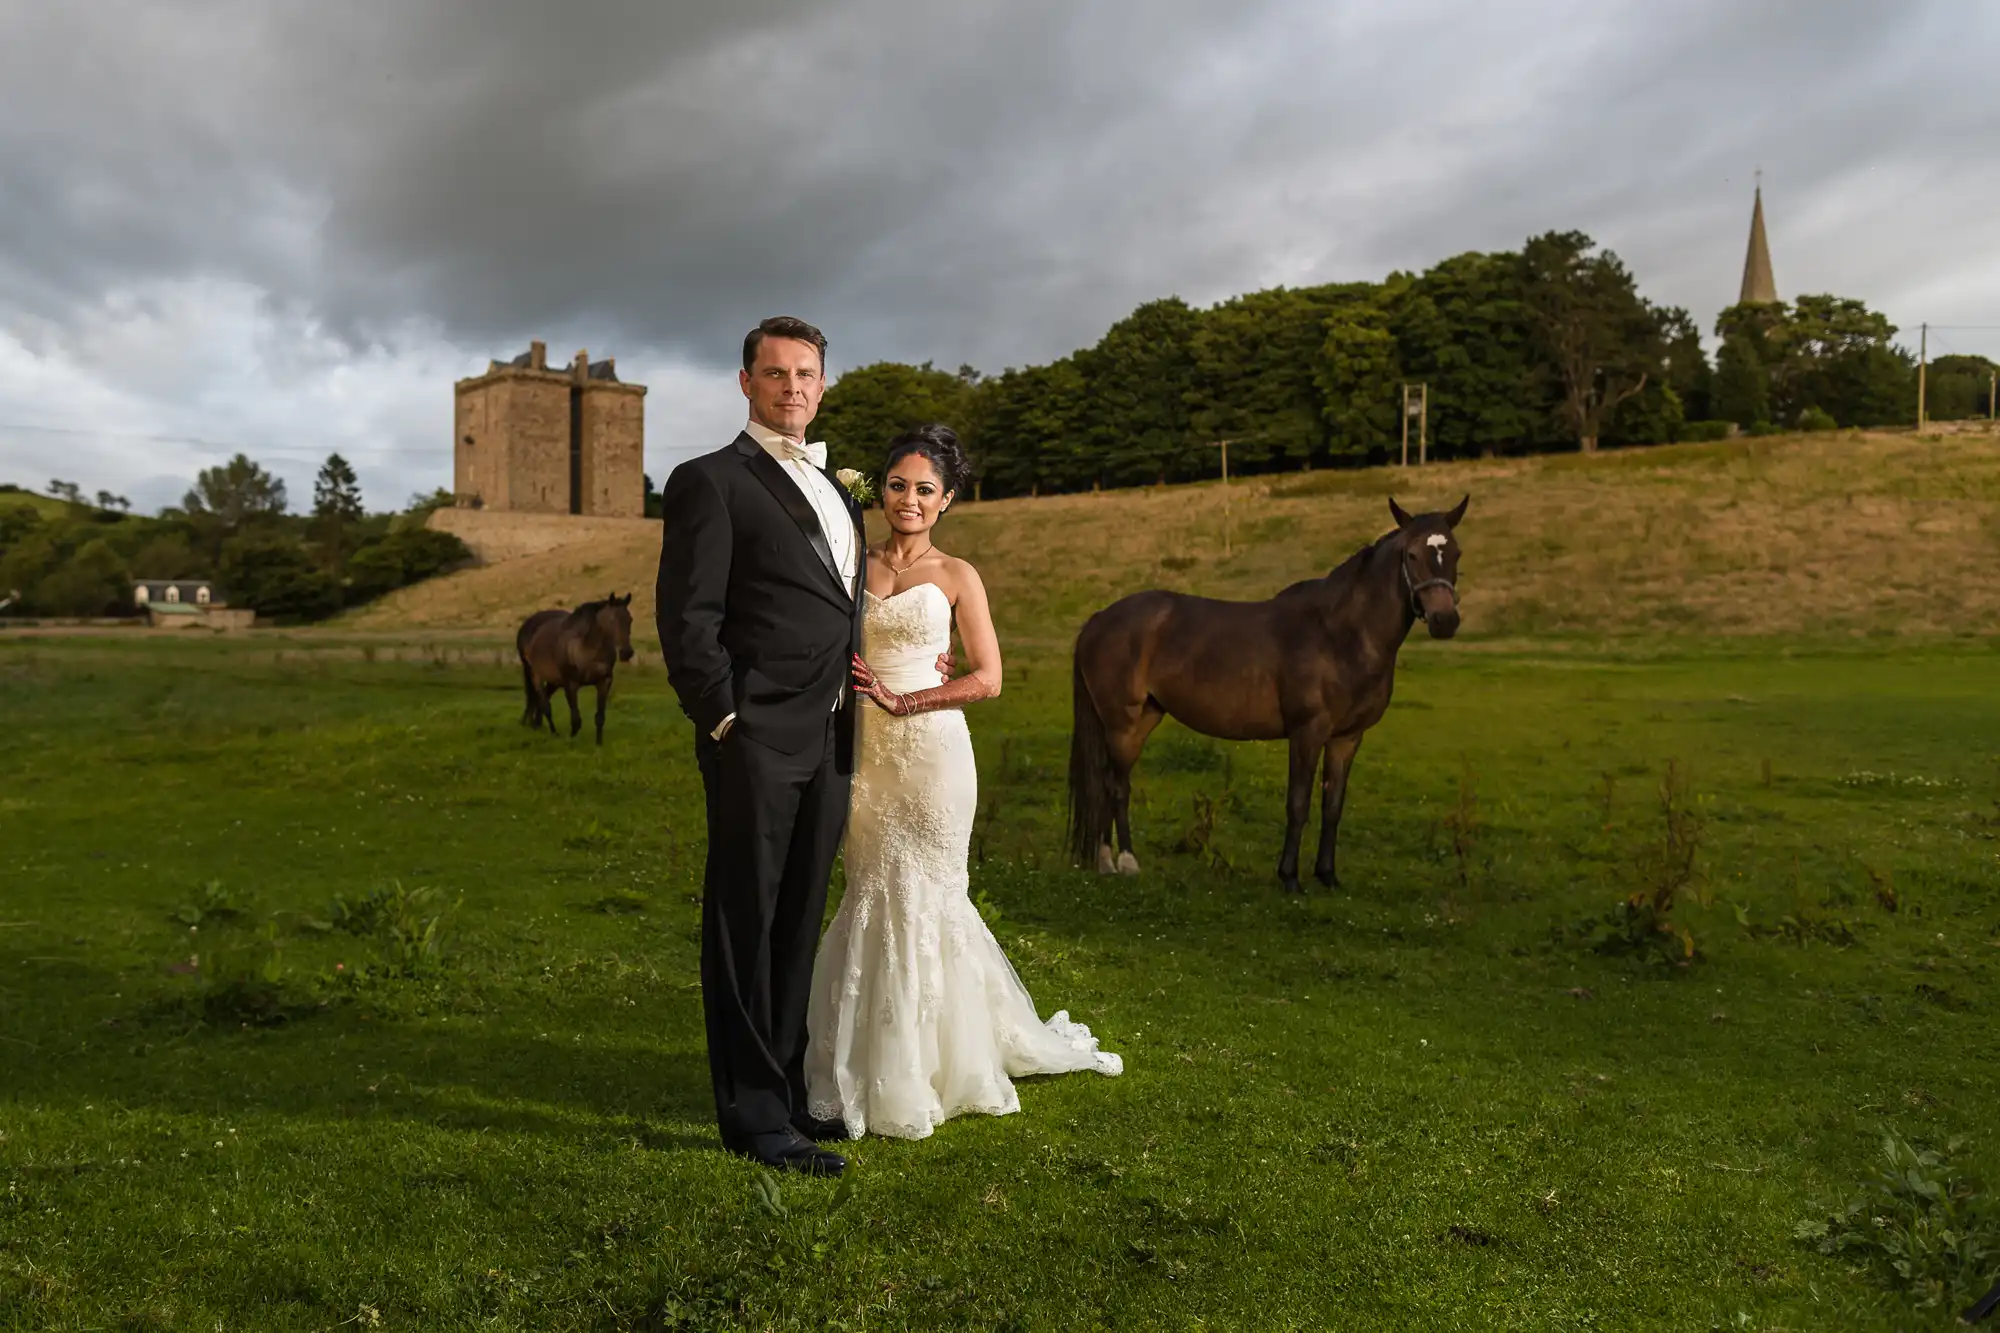 A couple in formal attire stands together on a grassy field with horses nearby and a castle in the background under a cloudy sky.